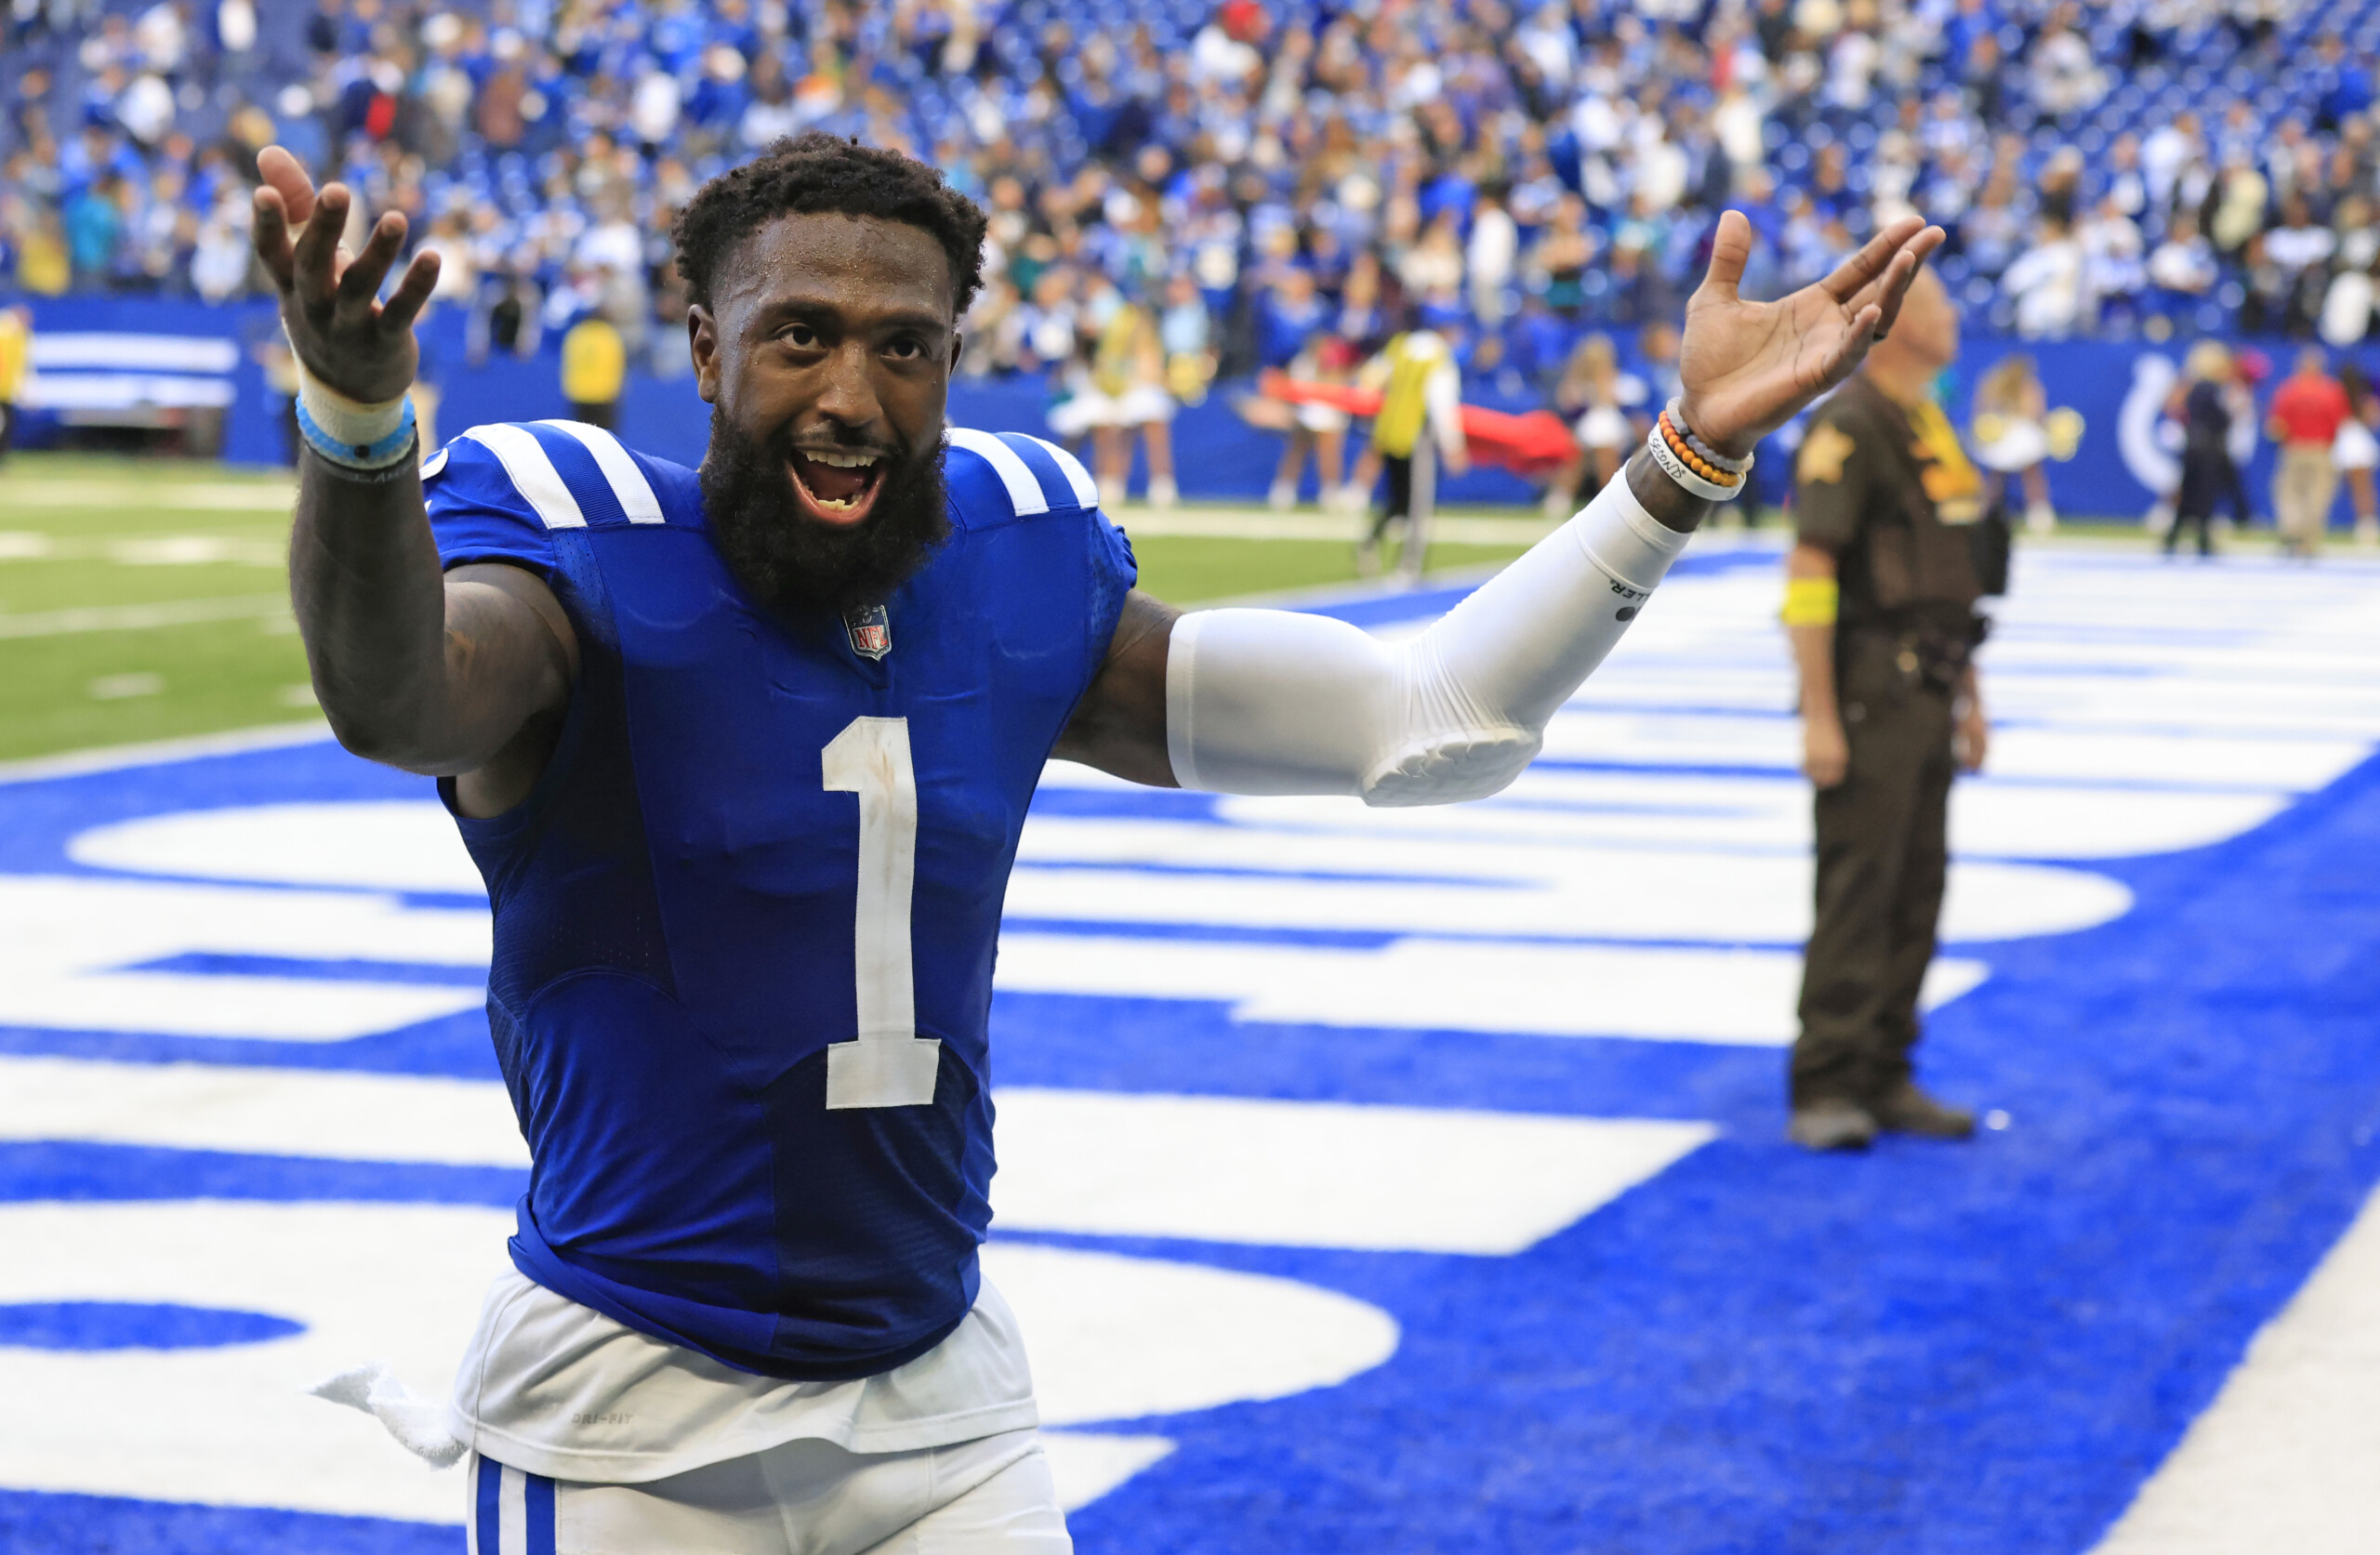 Colts Parris Campbell capitalizes on a healthy season